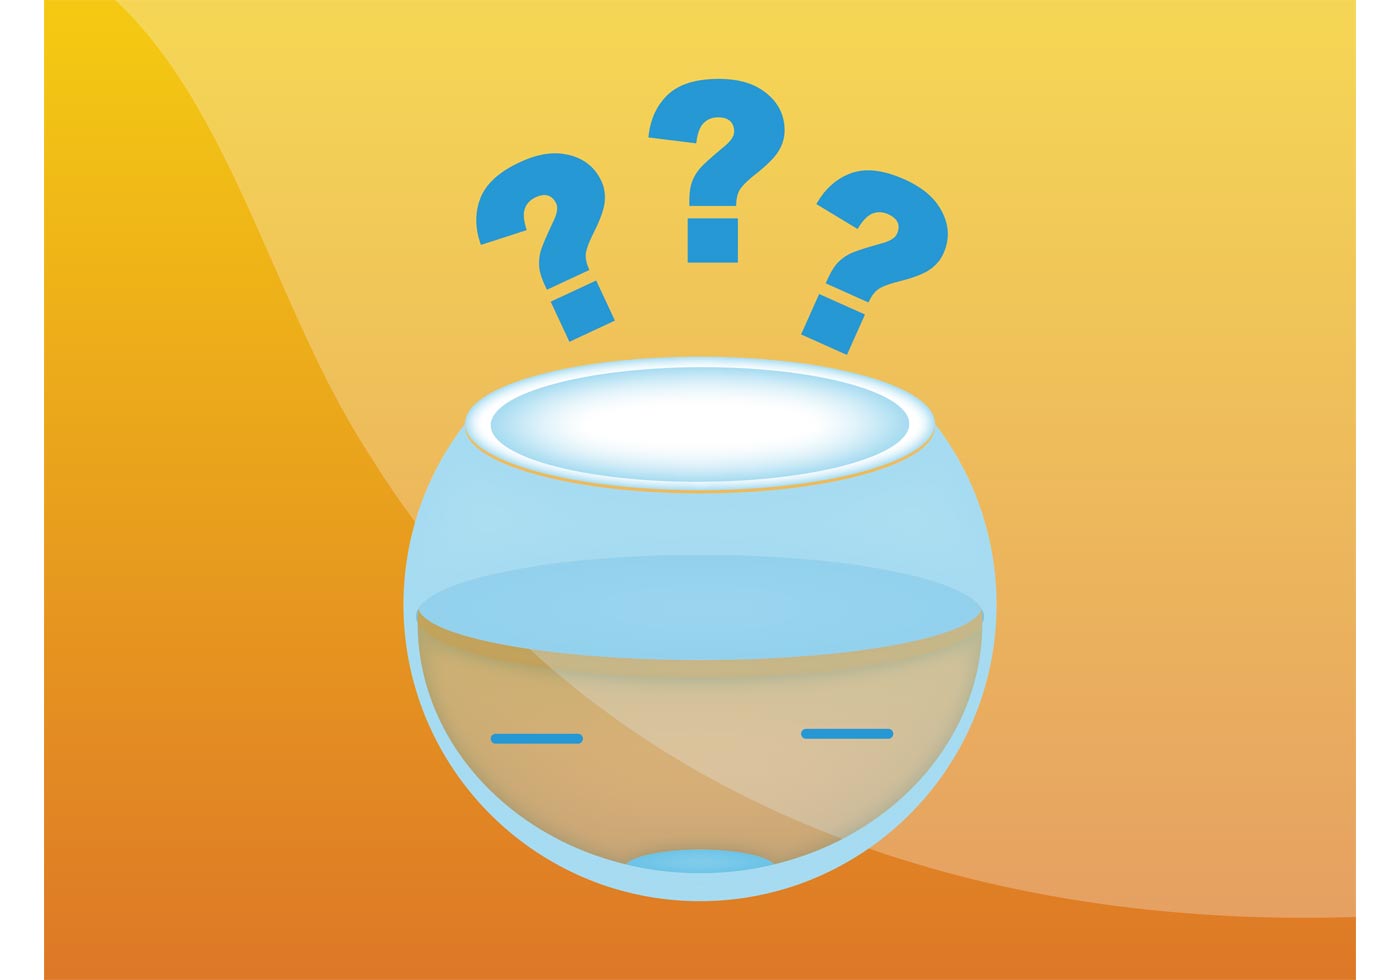 Download Fish Bowl - Download Free Vector Art, Stock Graphics & Images